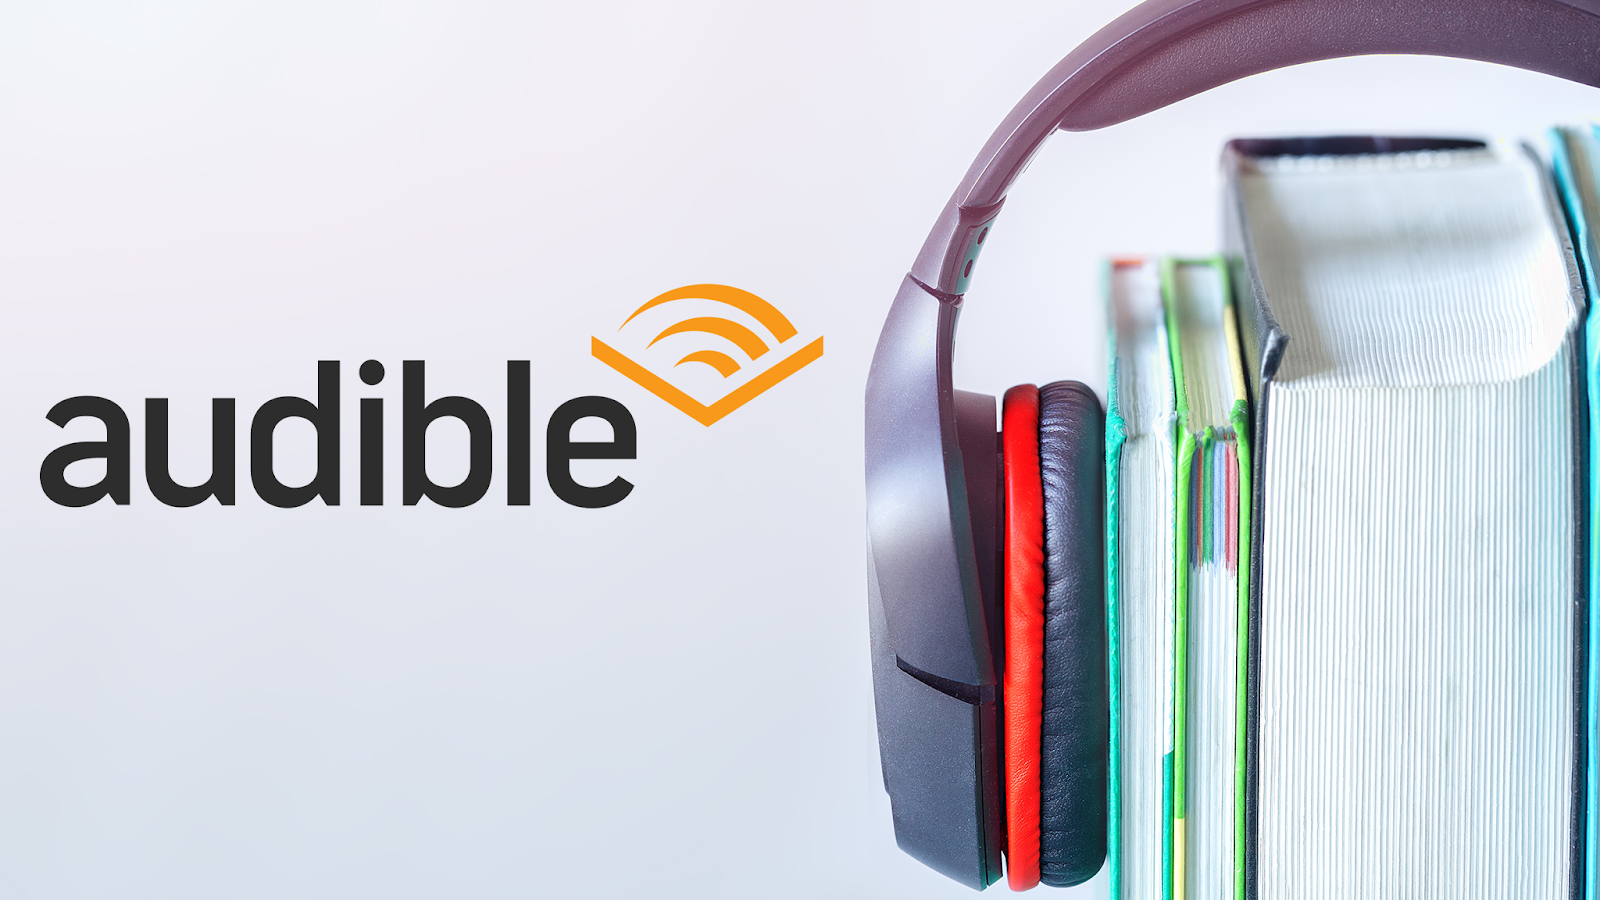 HOW TO: Make some GOOD MONEY with the help of the Amazon Audible Affiliate  Program | BlackHatWorld